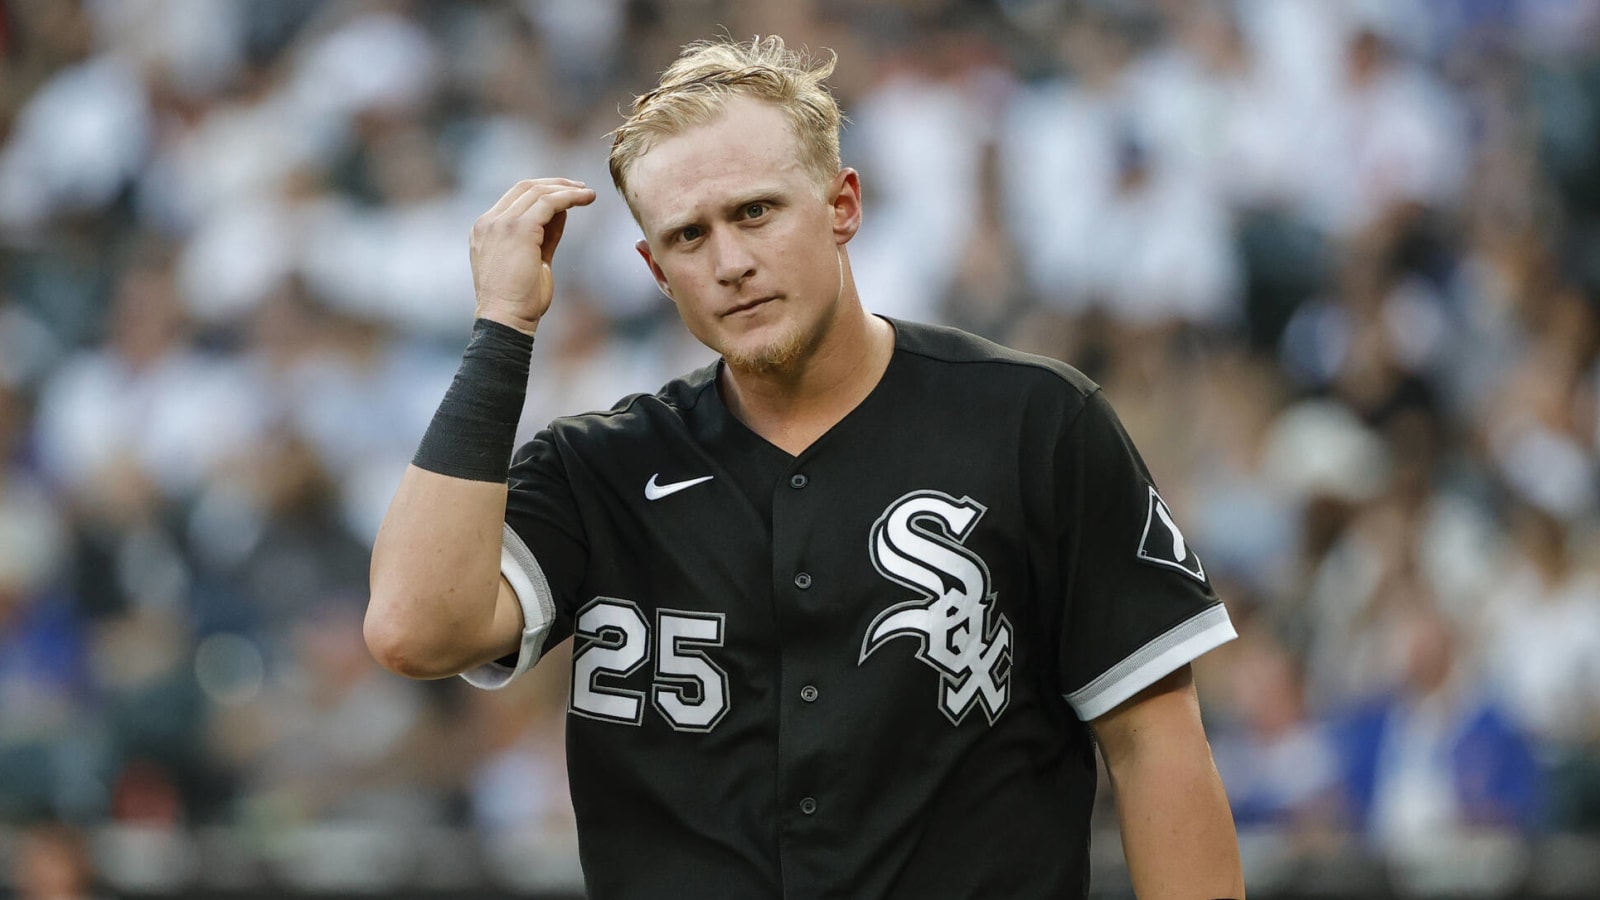 ChiSox have 'zero interest' in trading Vaughn to A's for Montas